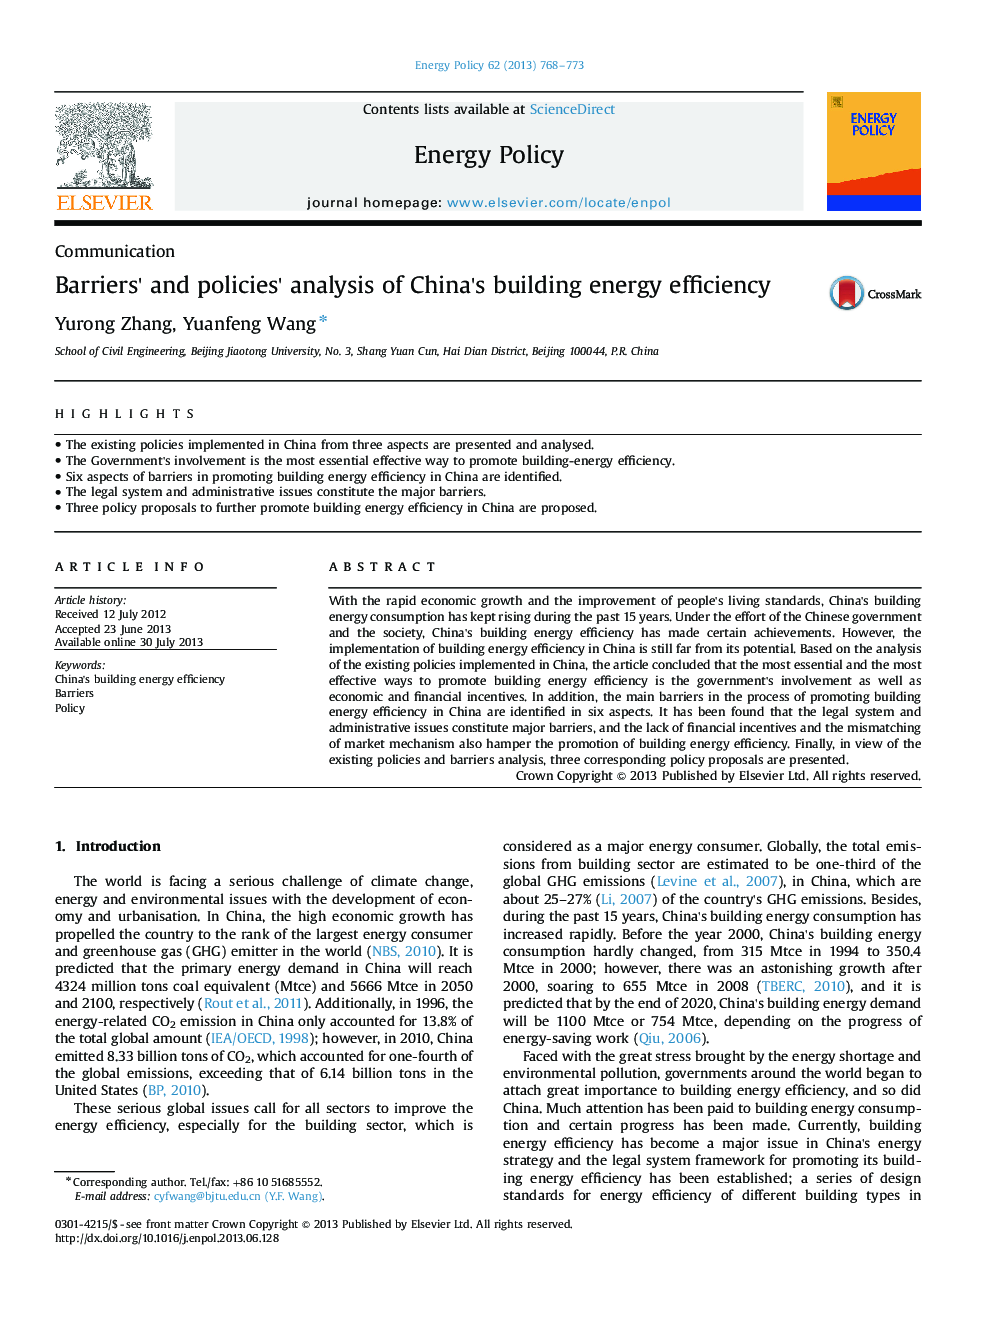 Barriers' and policies' analysis of China's building energy efficiency